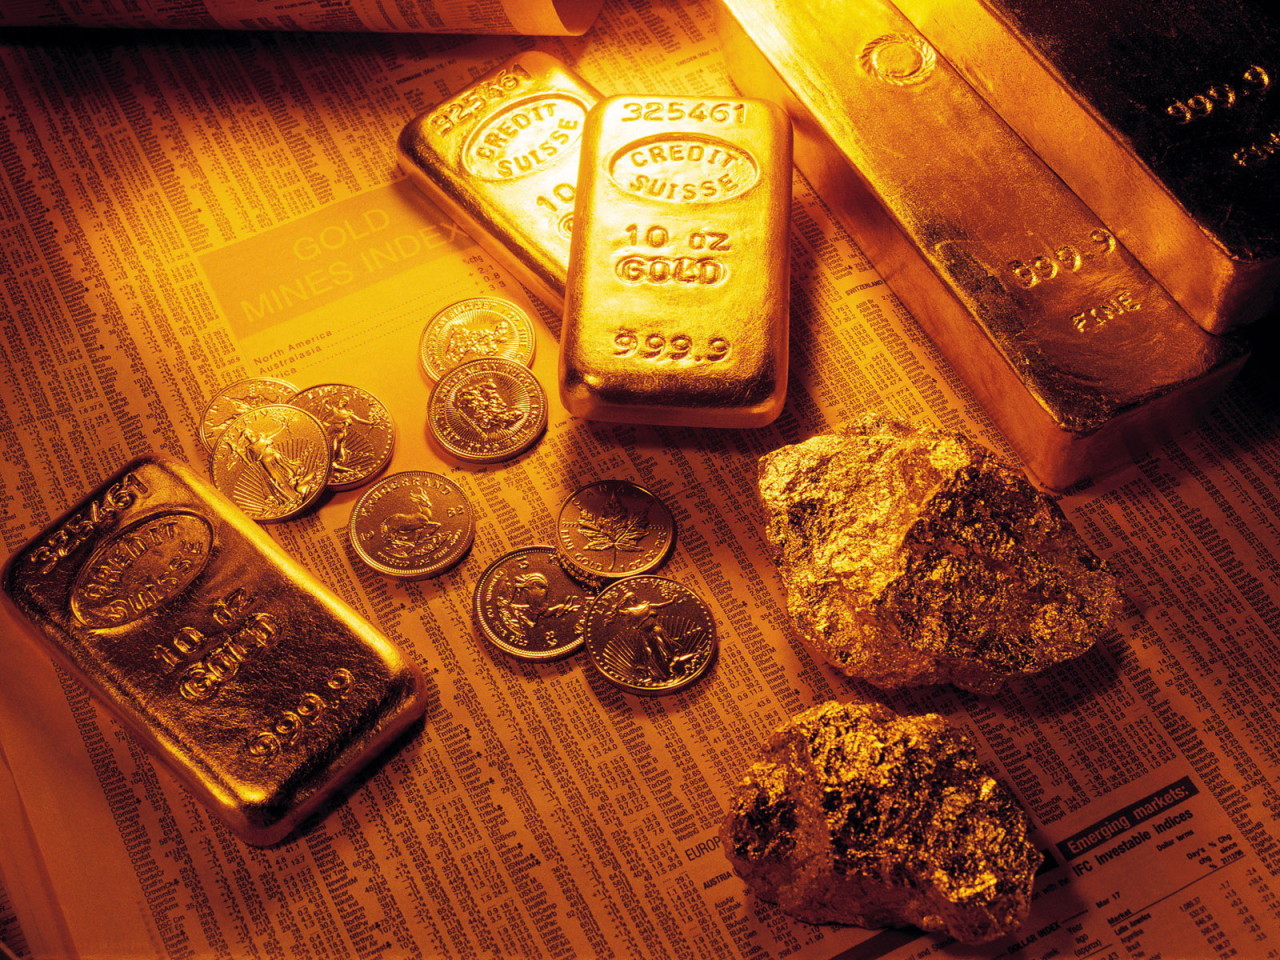 Gold bars and stones